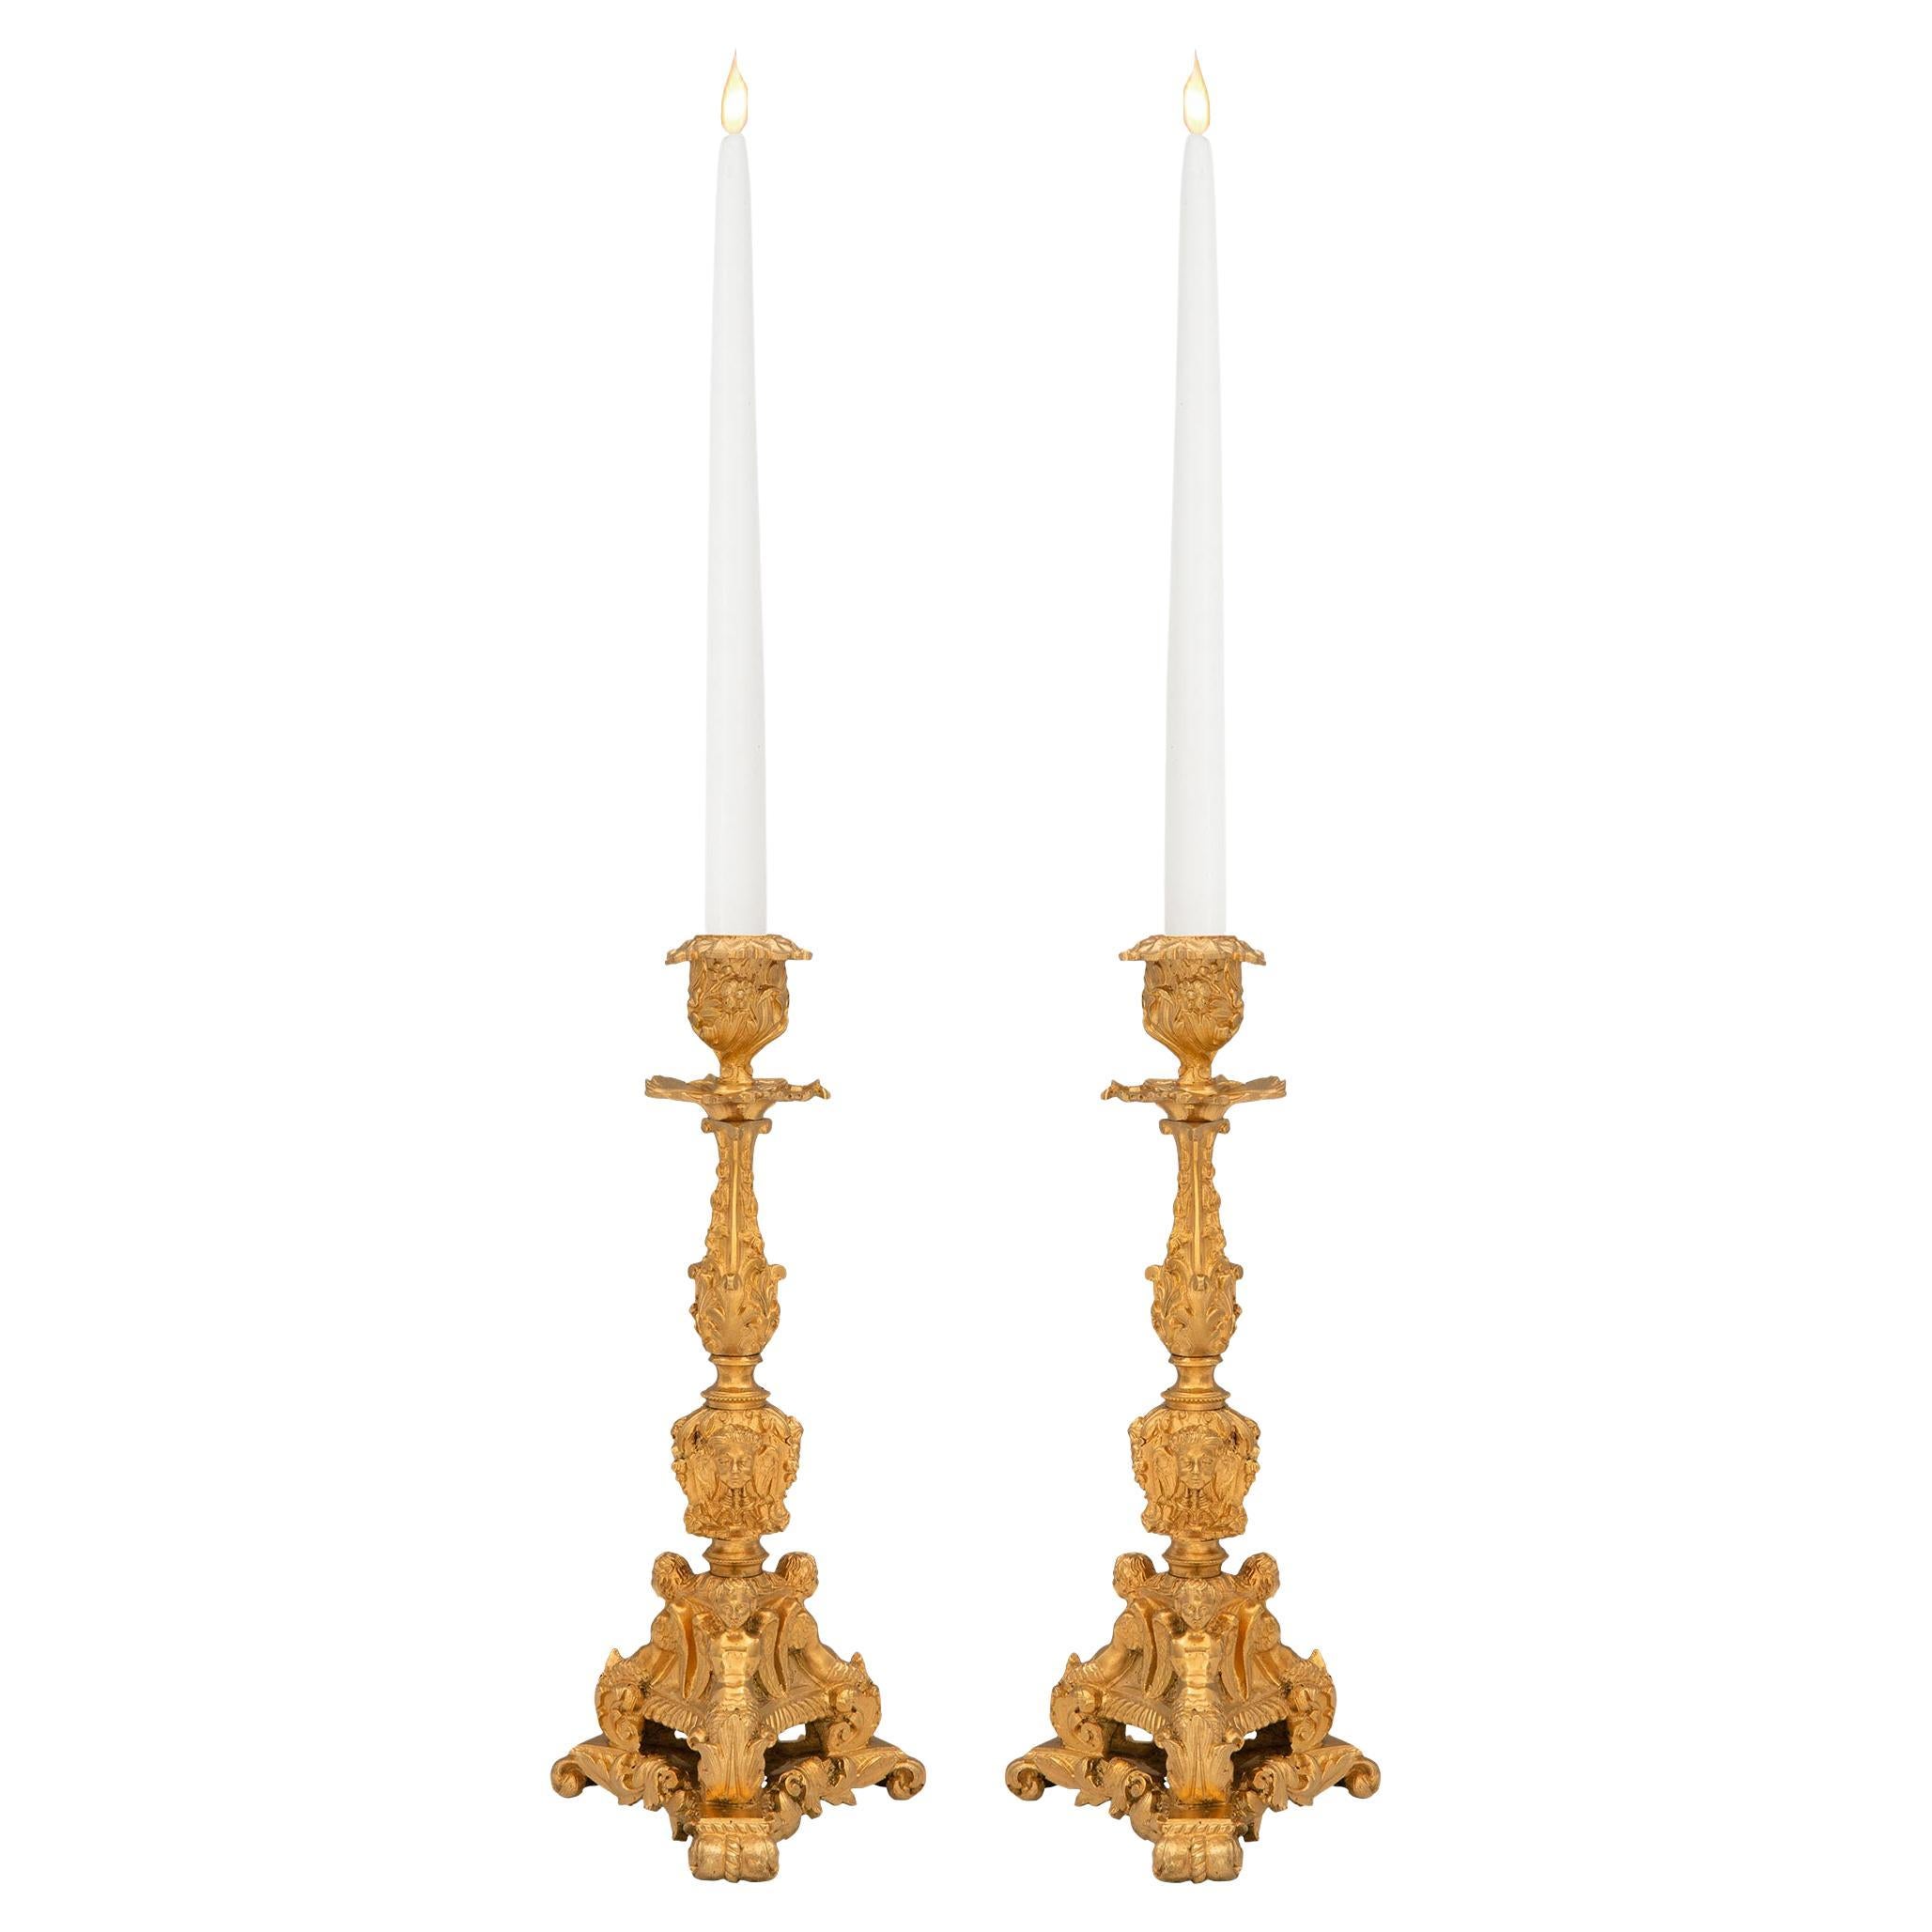 Pair of French 19th Century Regence Style Ormolu Candlesticks For Sale